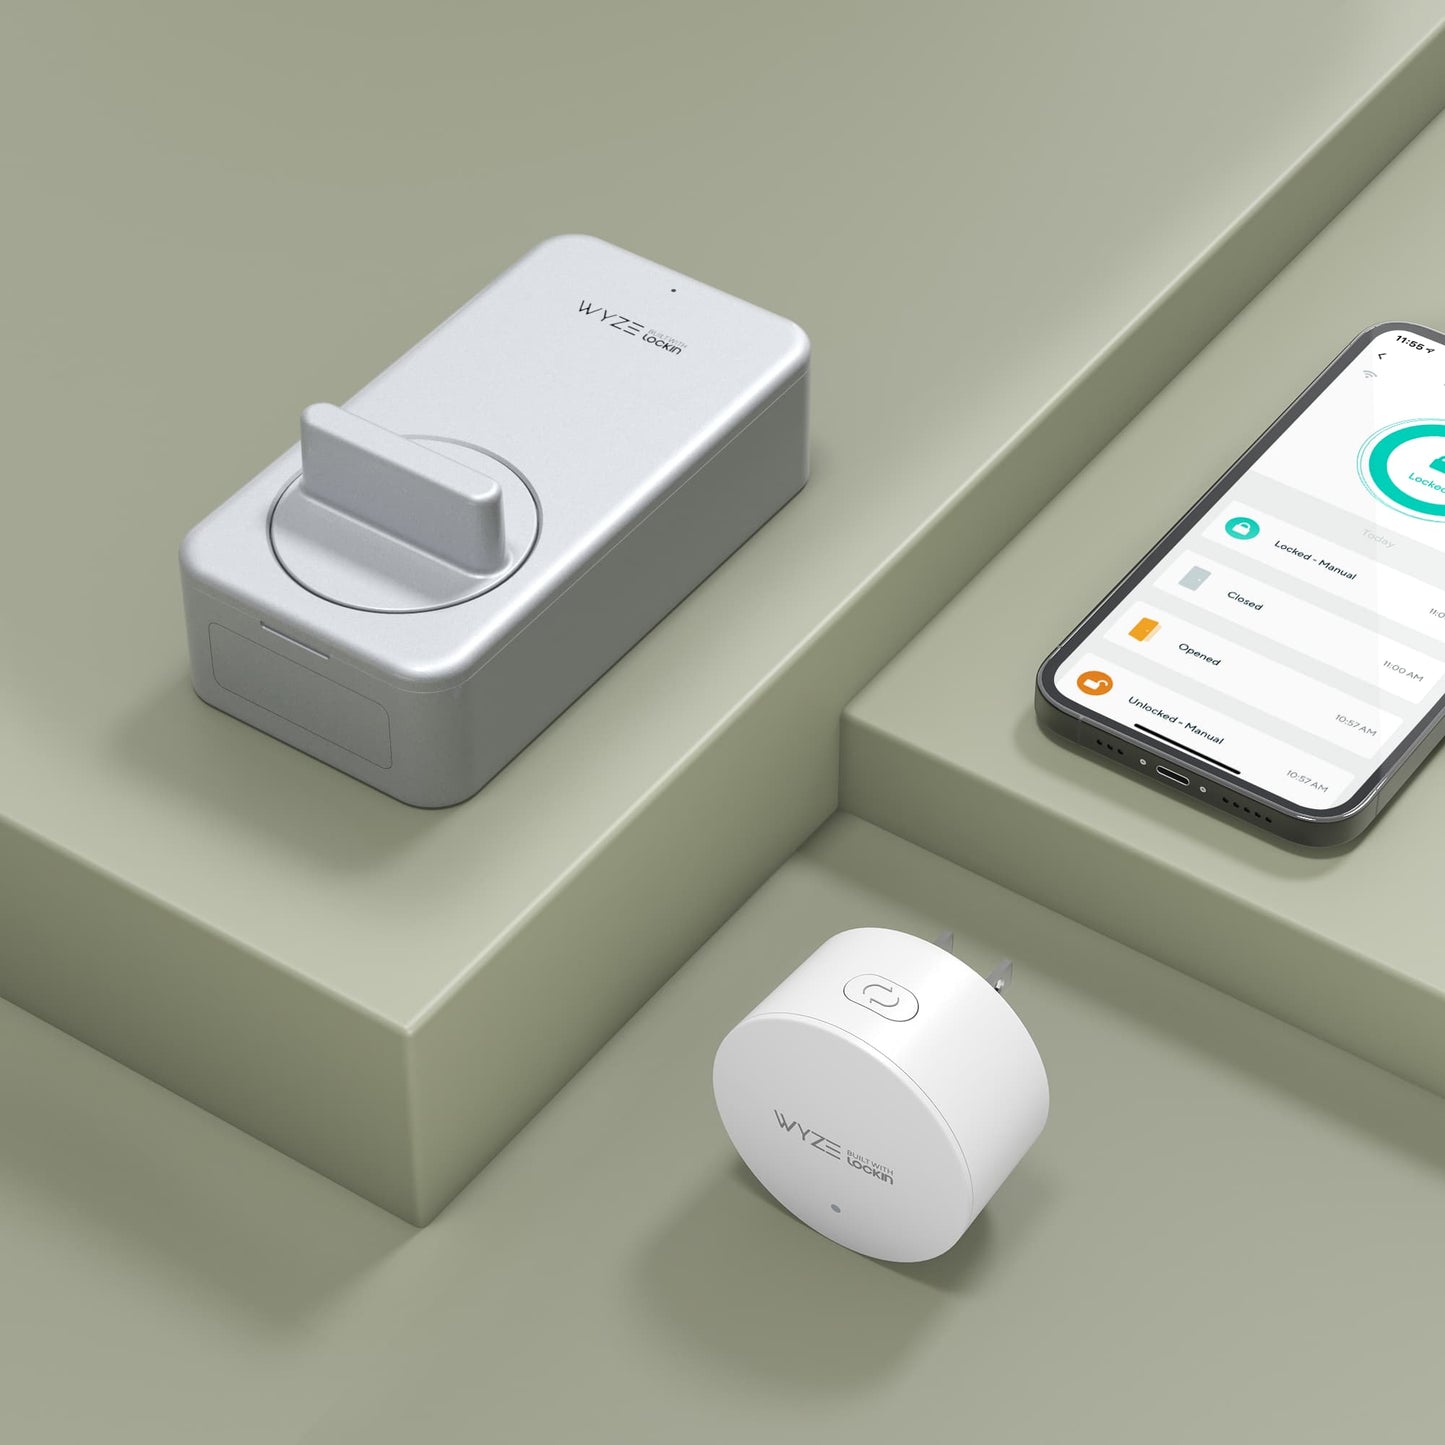 Wyze Lock product, smartphone, and gateway laid out on a gray surface.